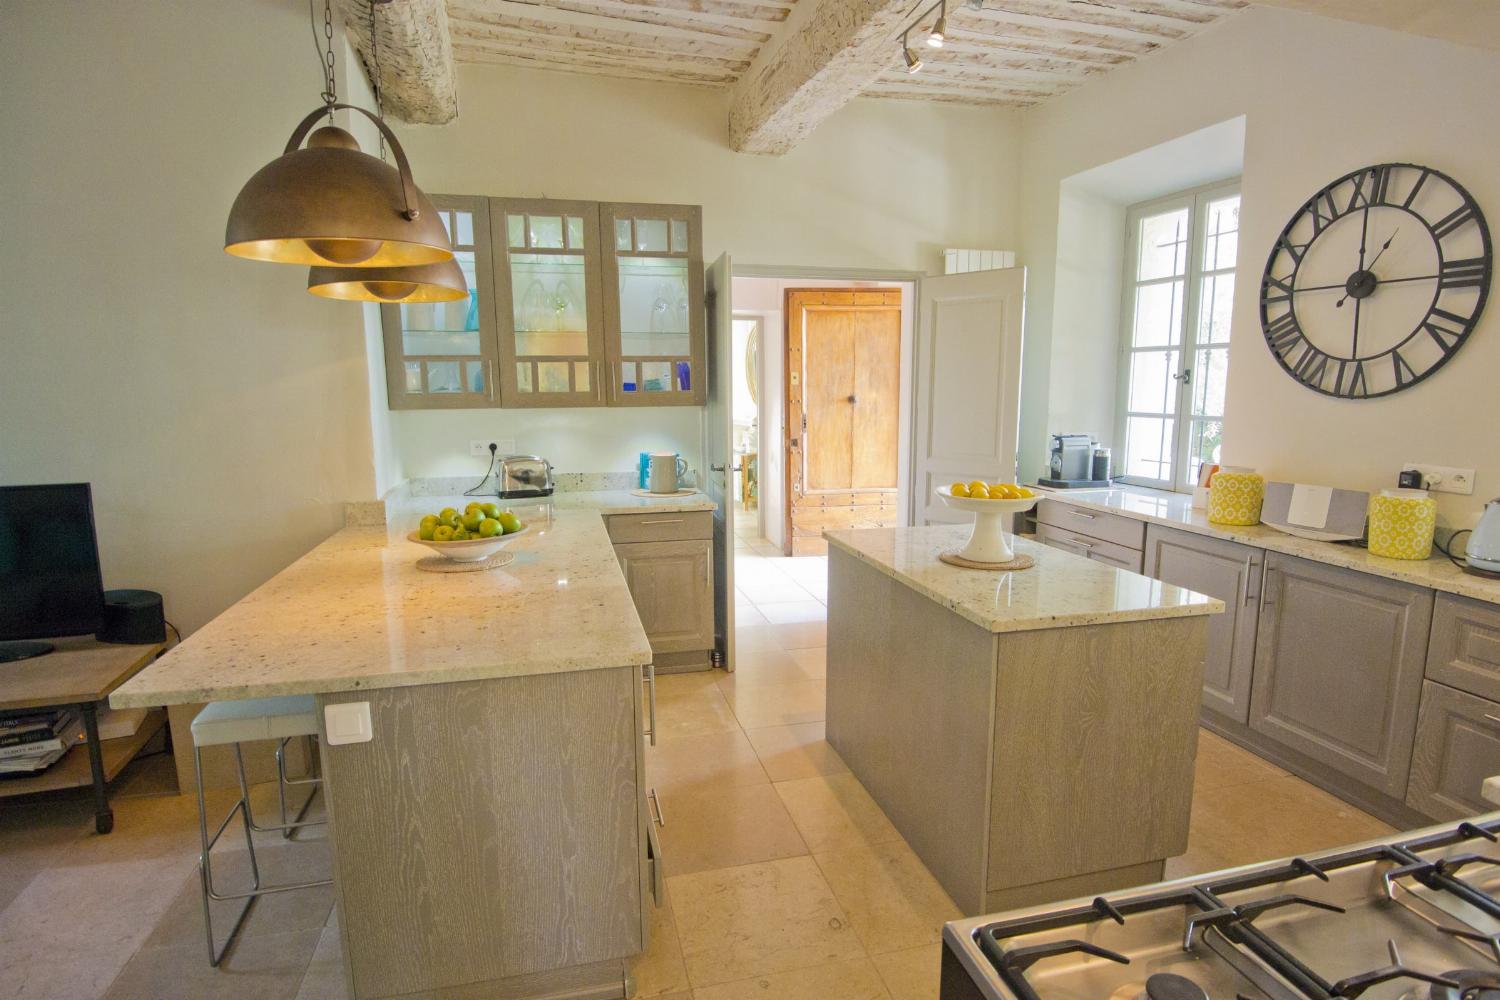 Kitchen | Holiday home in Provence